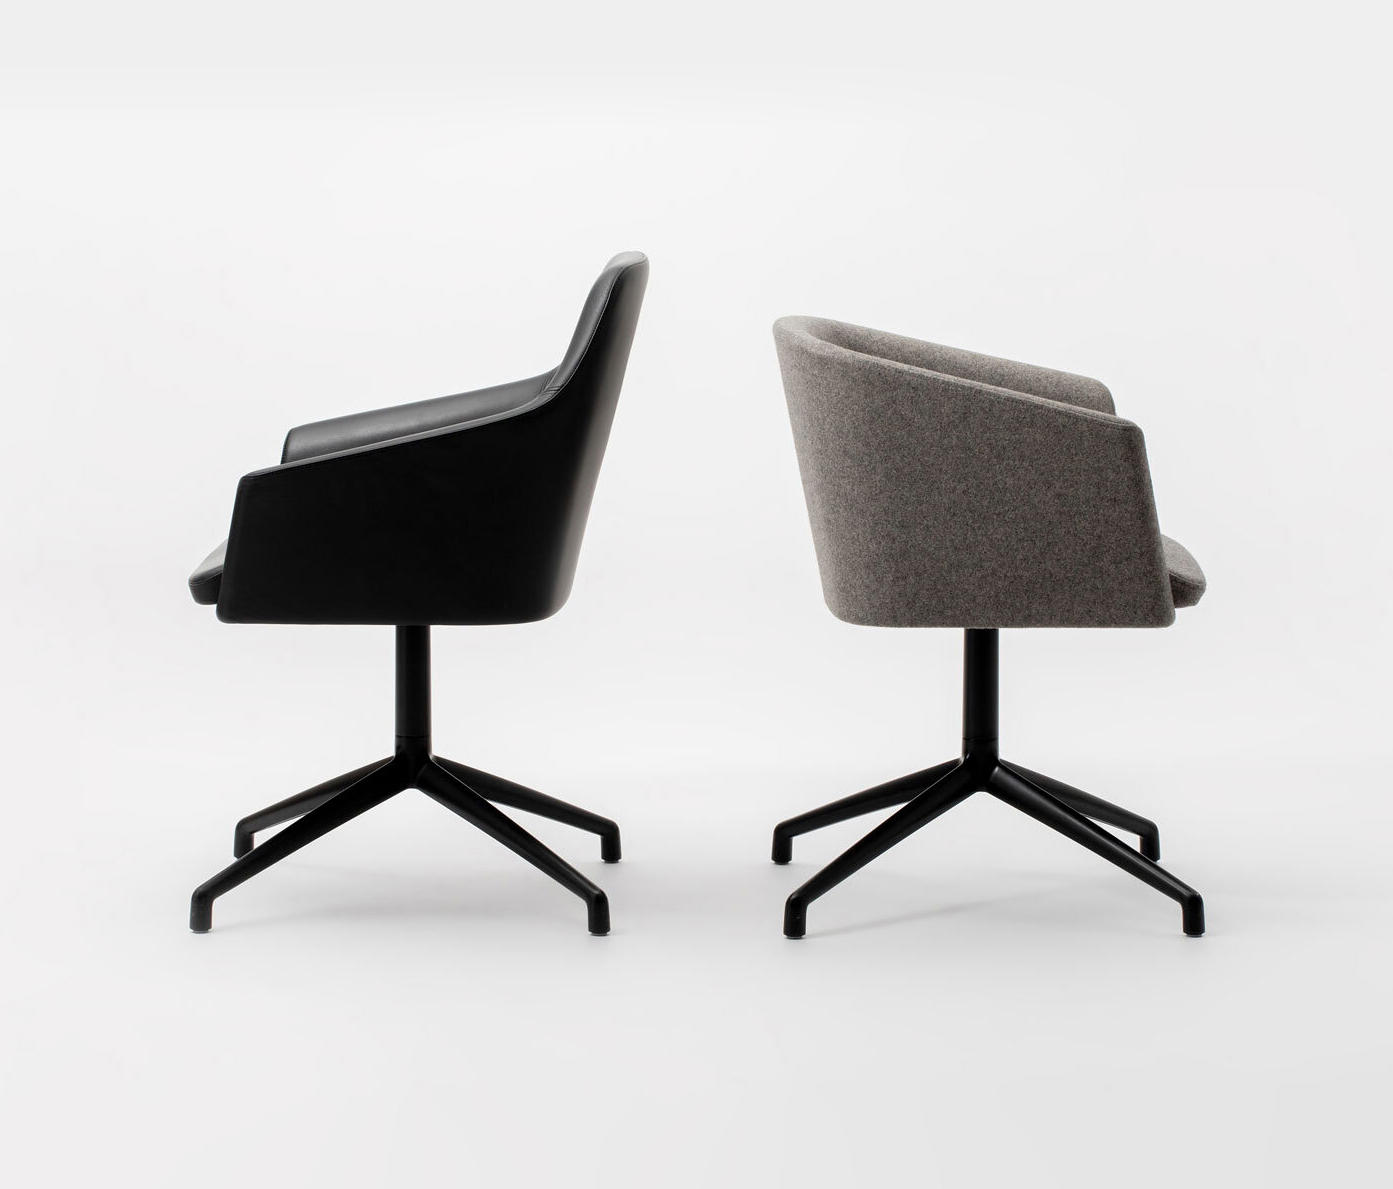 TOTO - Chairs from Boss Design | Architonic